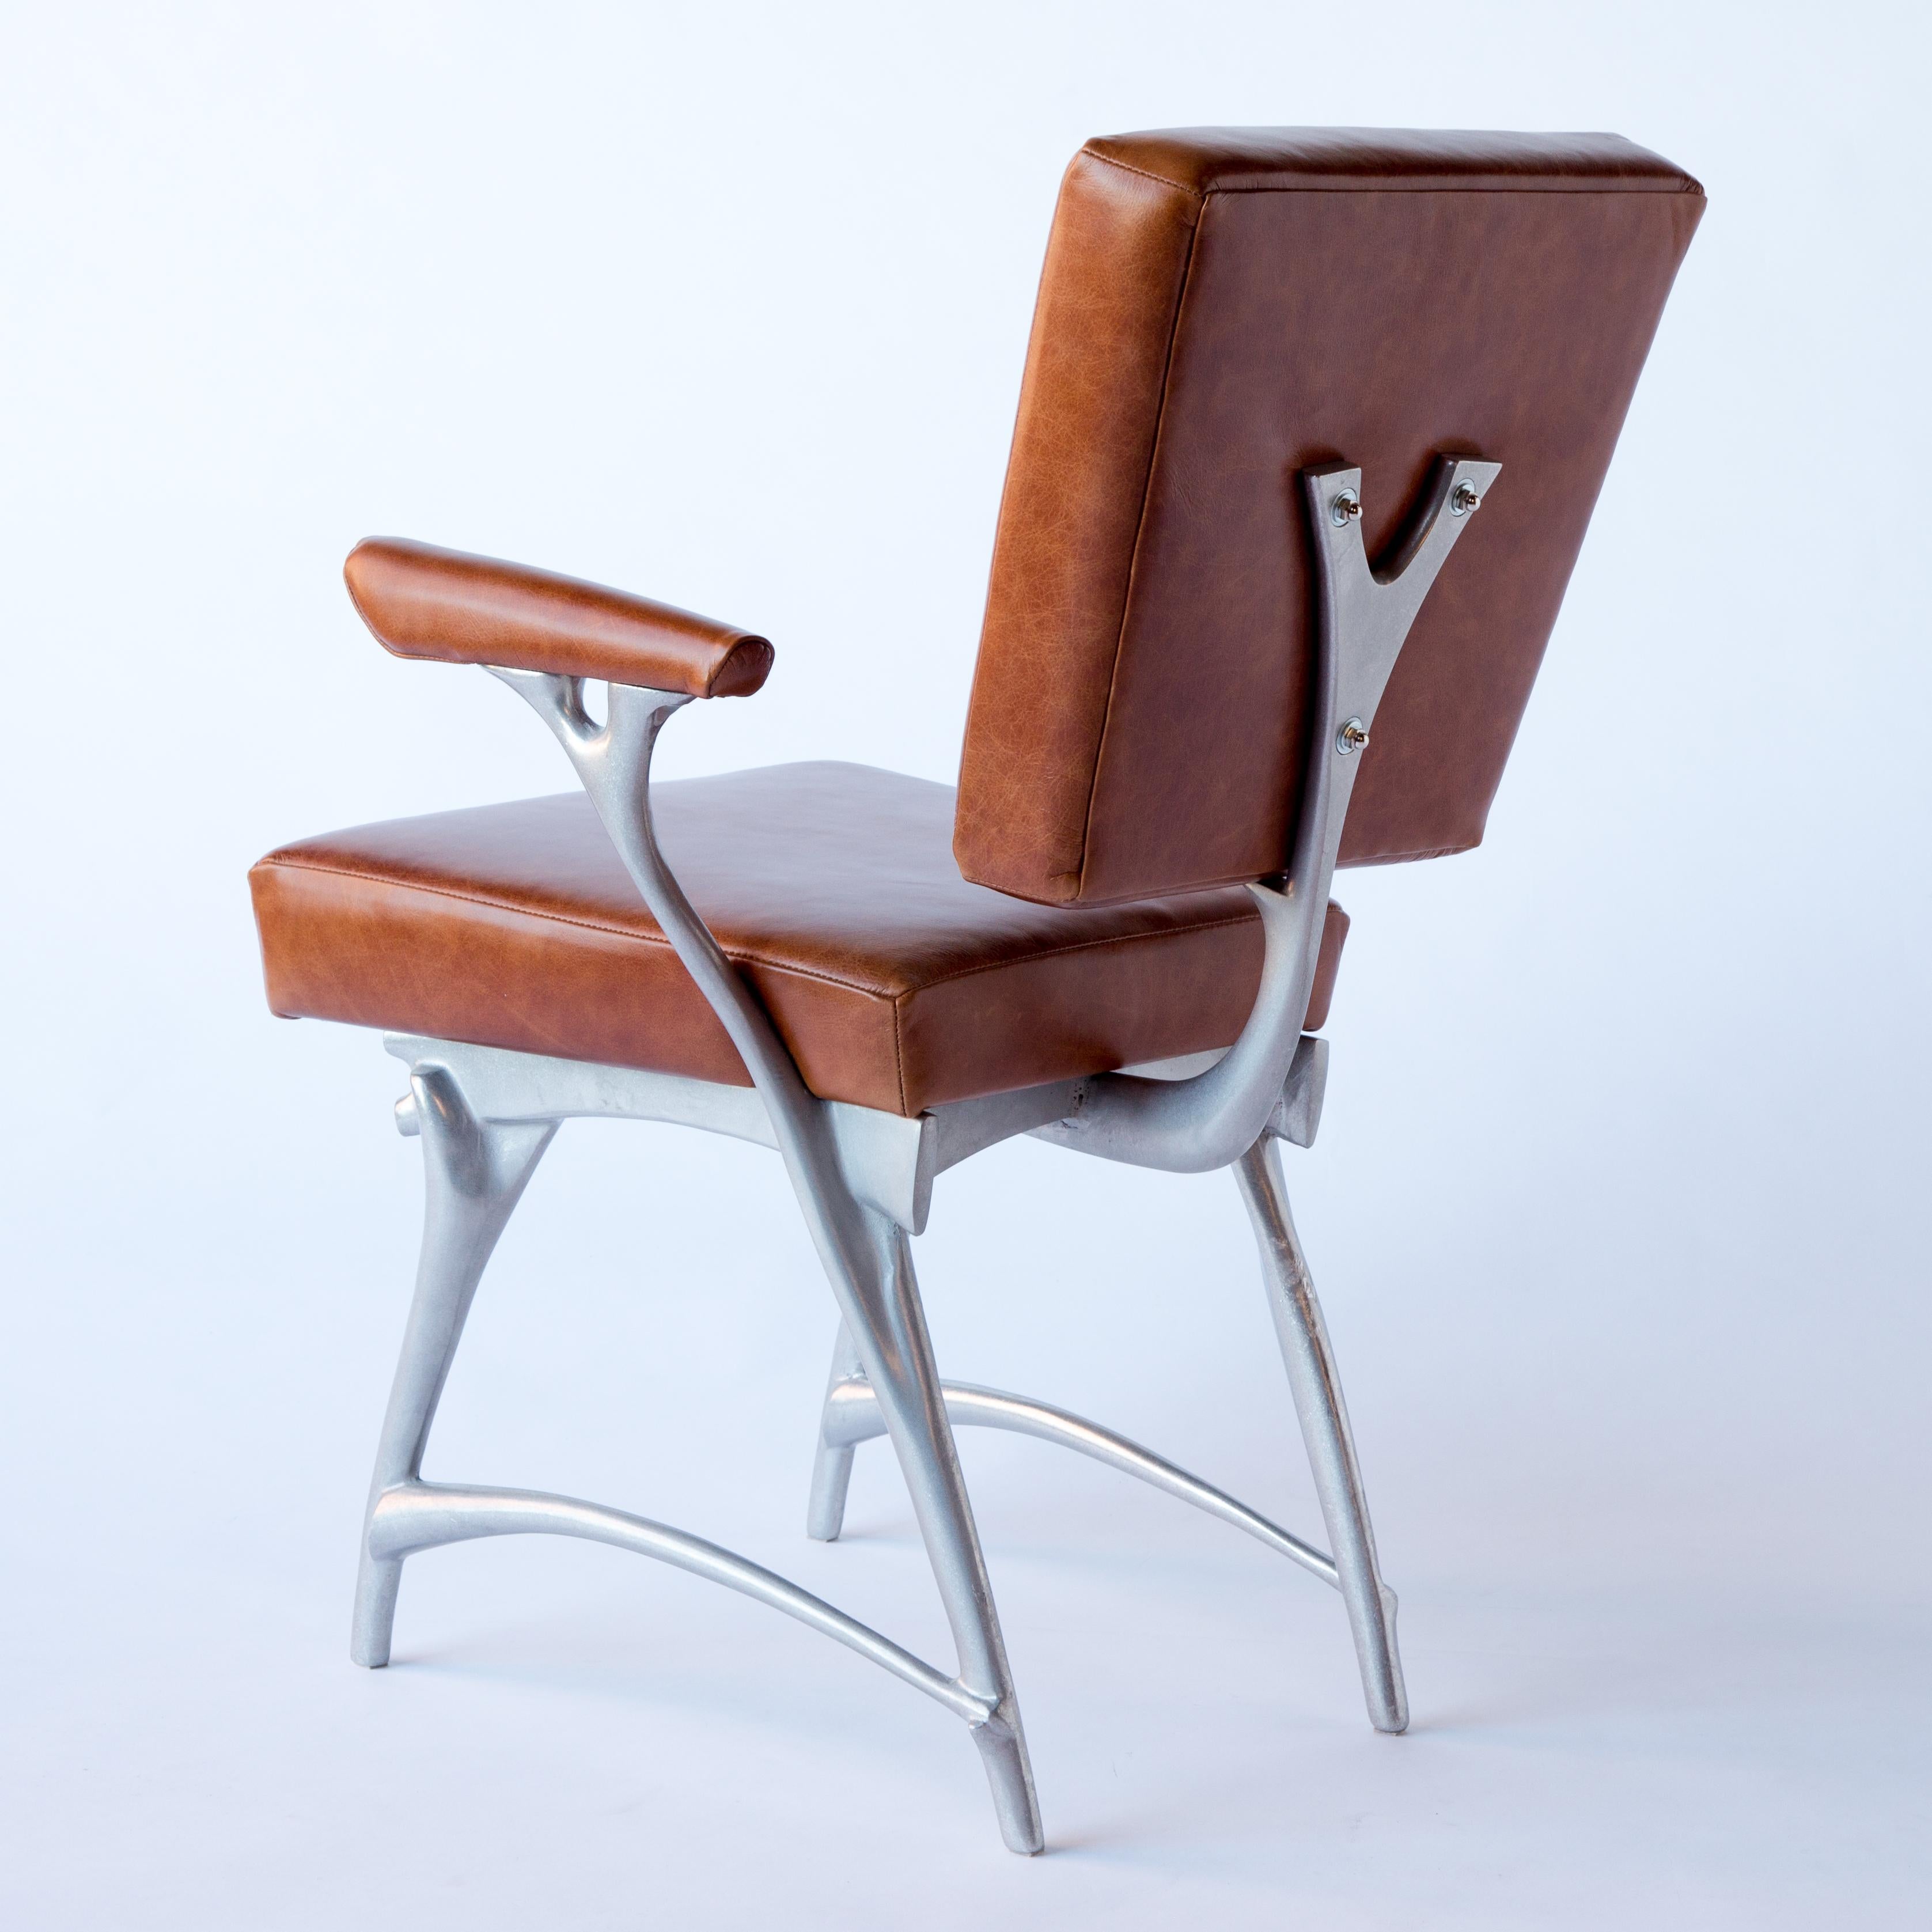 Jordan Mozer (b.1958), Twiggy Armchair,  Cast Recycled Cast Aluminum, Burnished, Leather Upholstery, Made in Chicago, USA 1997/2019. This is a 2015/19 variation on the original 1997 design. Provenance: collection of the artist. Signed. Part of a